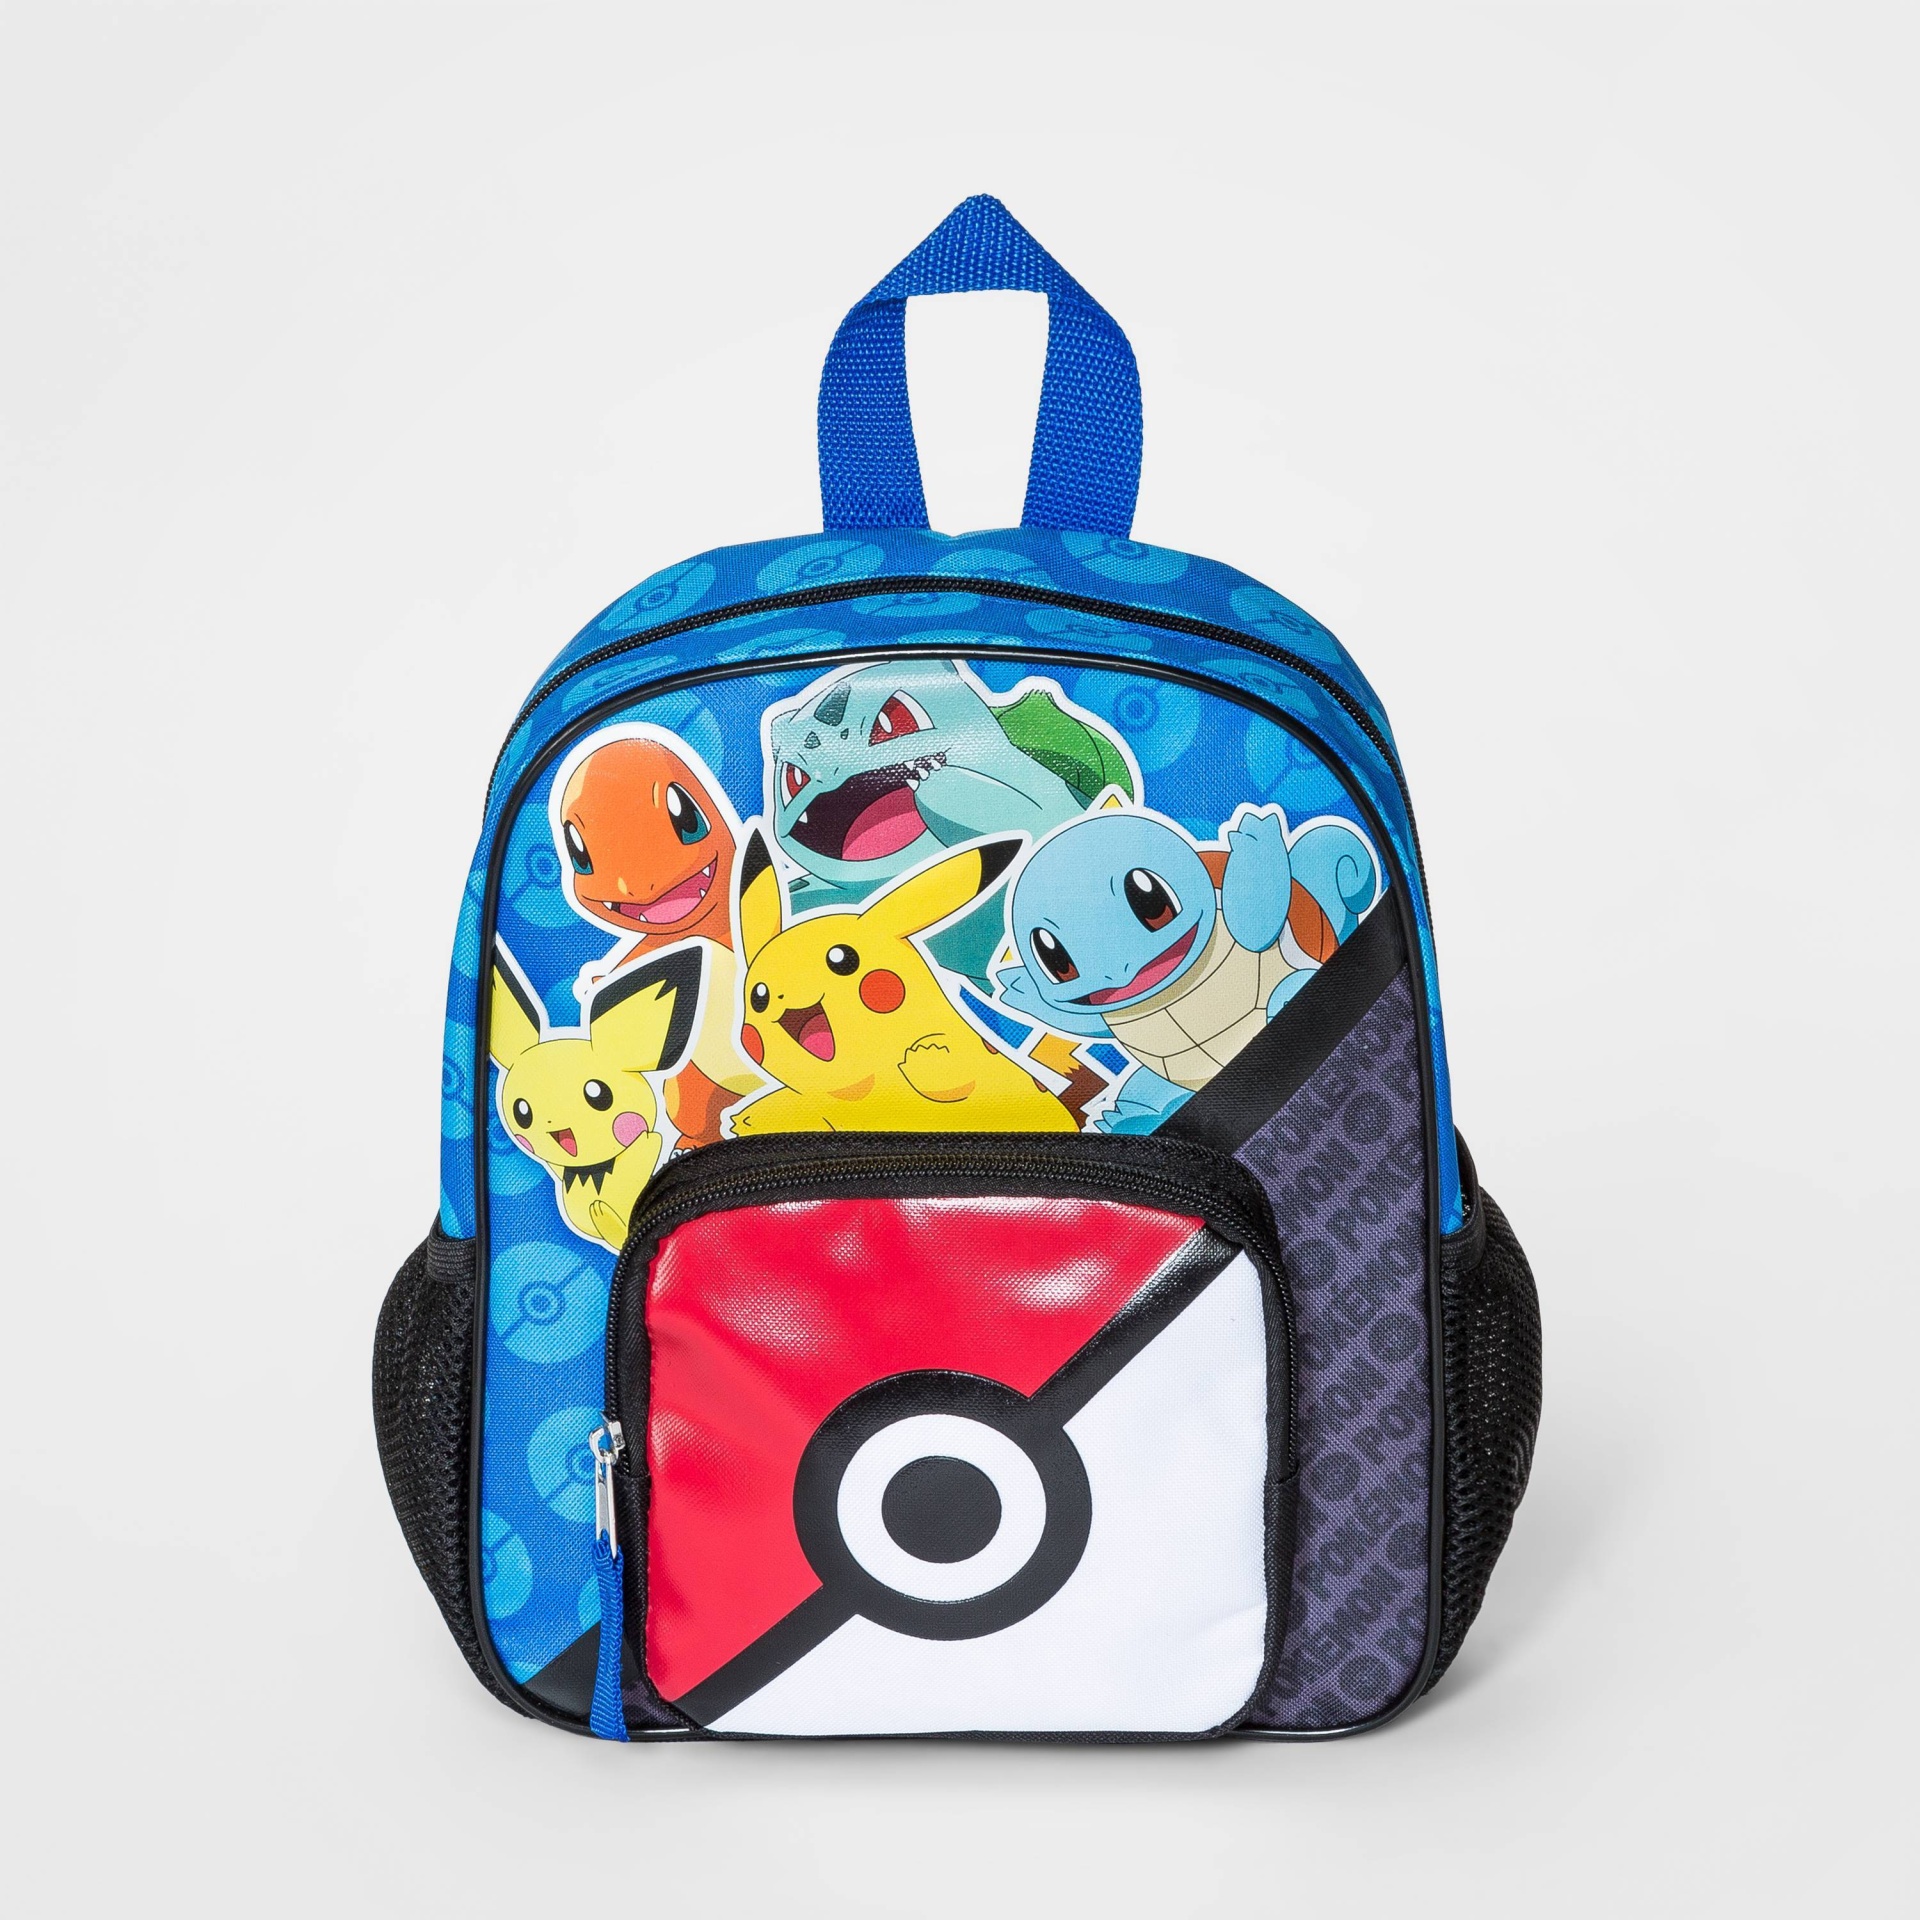 Pokémon Preschool Backpack - Squirtle - Blue » Quick Shipping